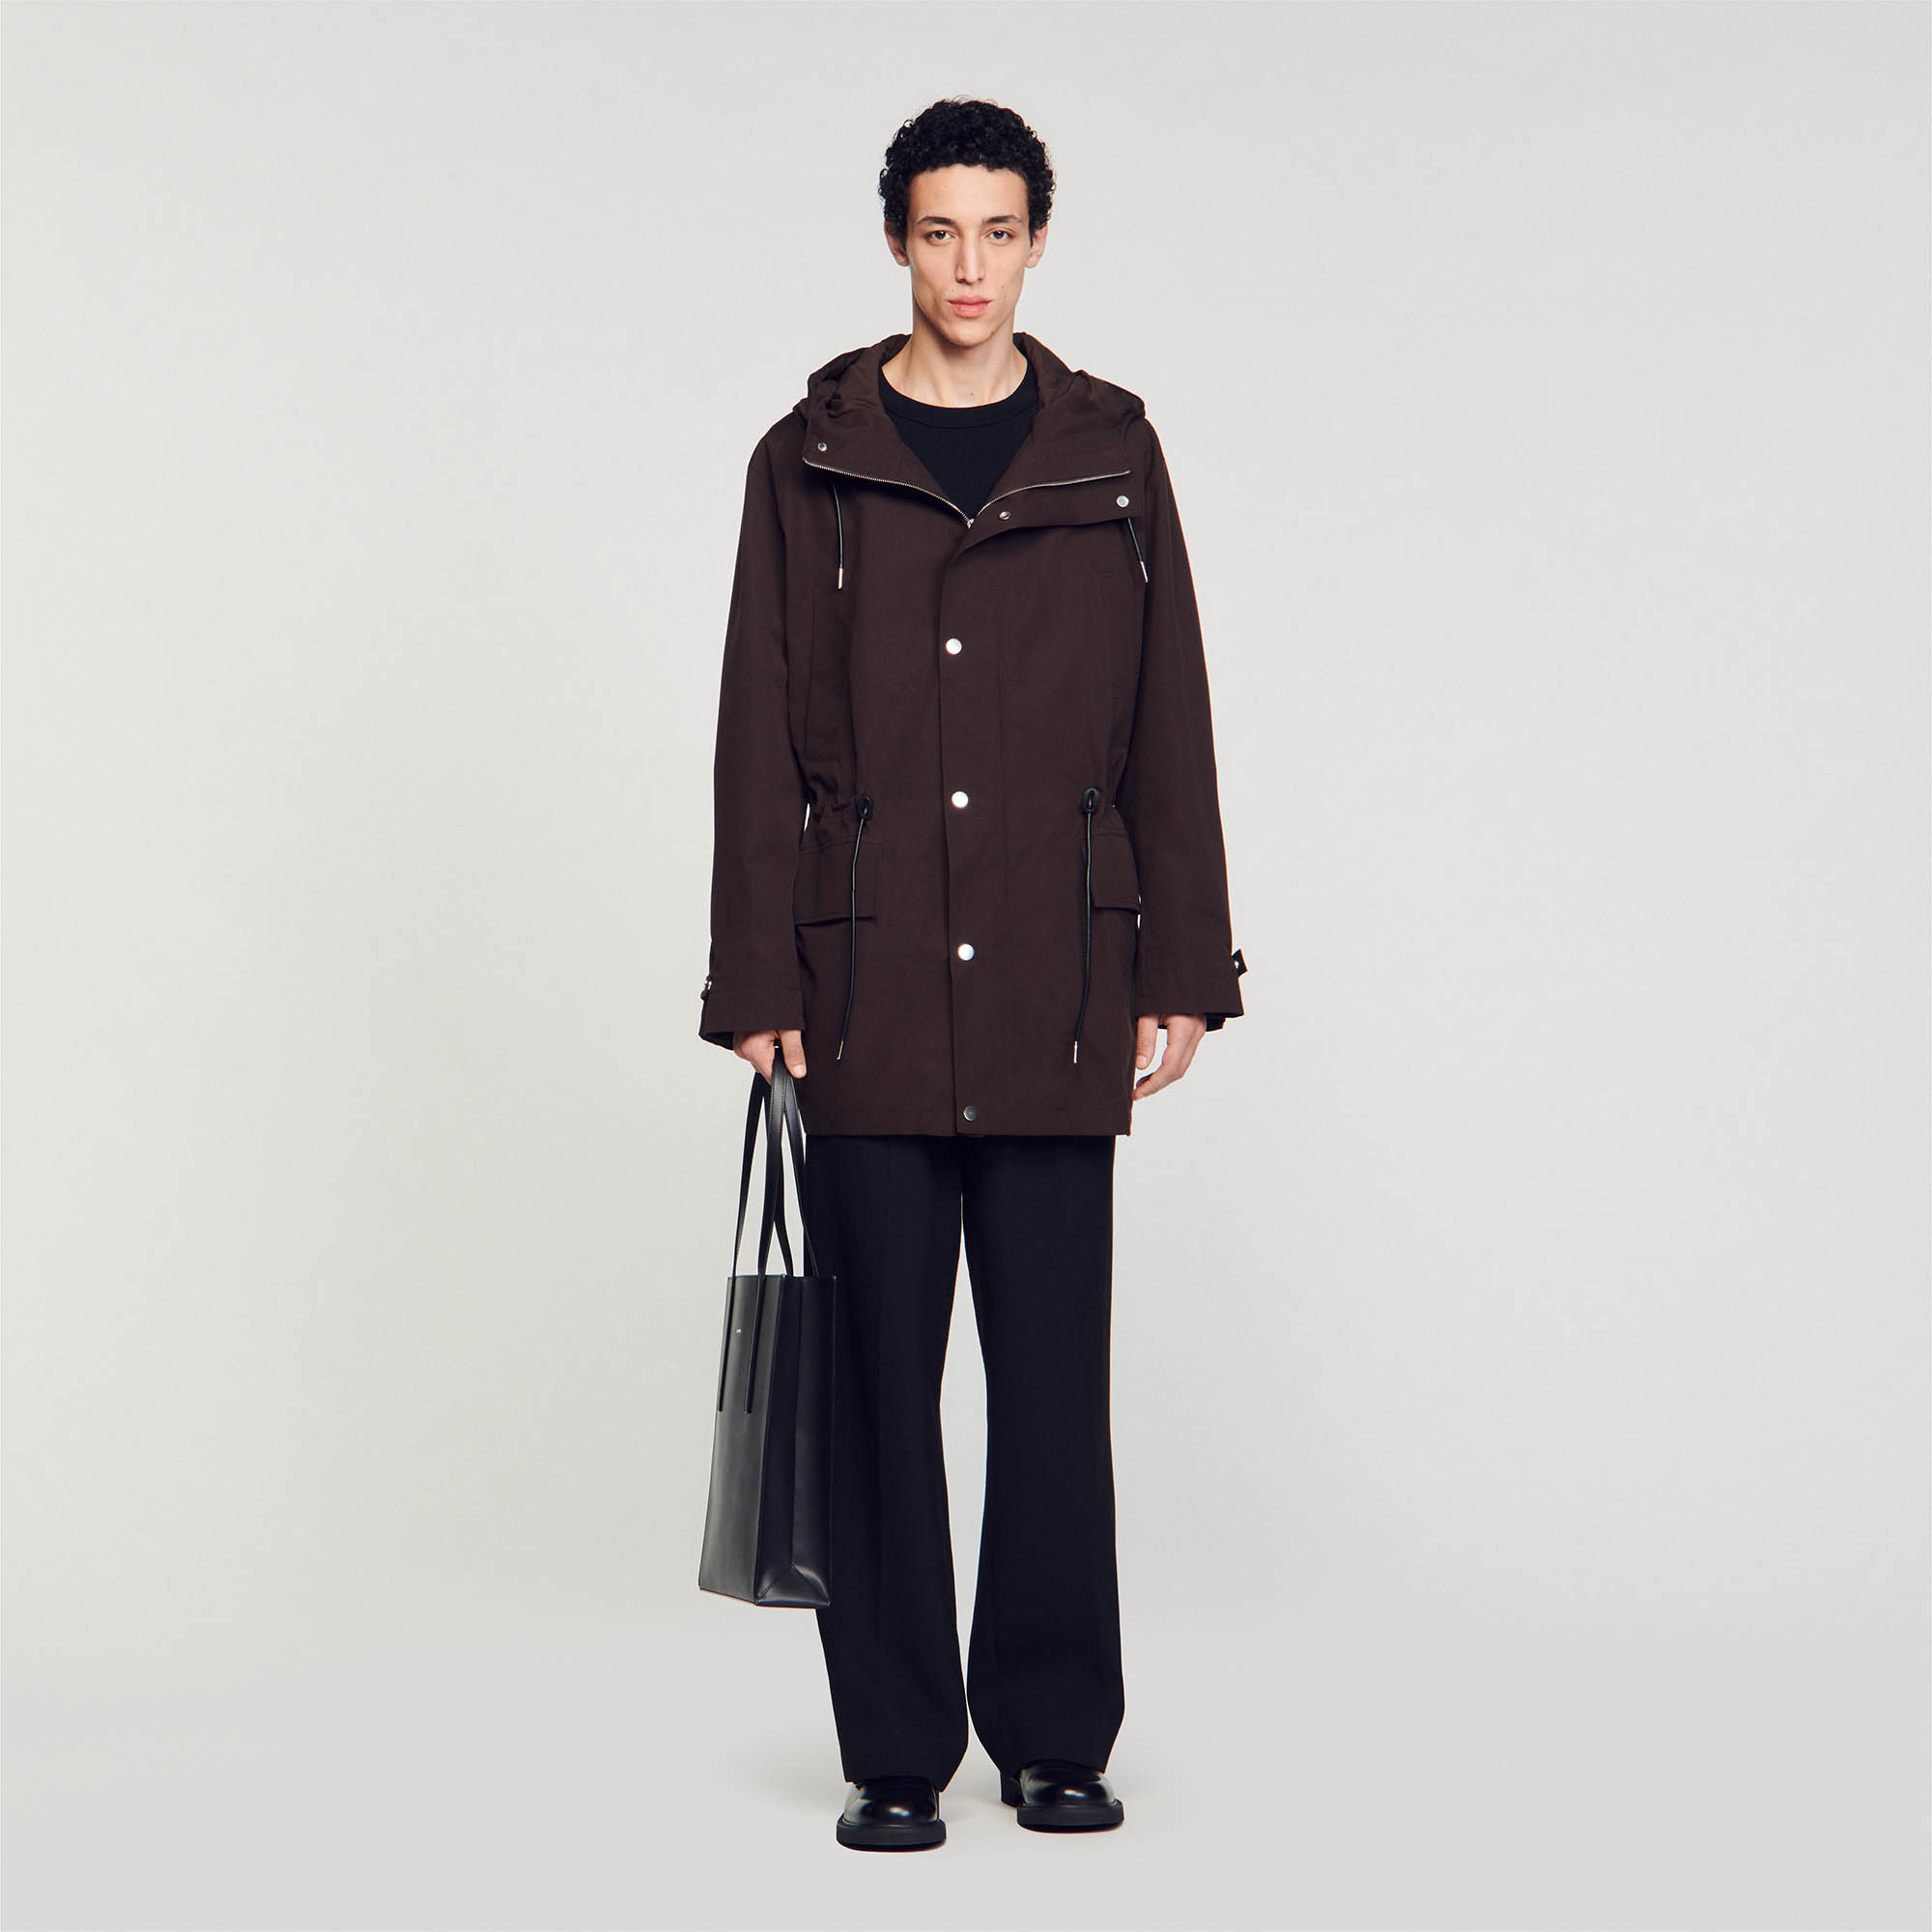 Sandro cotton Body lining: Cotton parka with long sleeves, press stud zip fastening, drawstring hood, chest pockets and flap pockets, embellished with a leather jacron